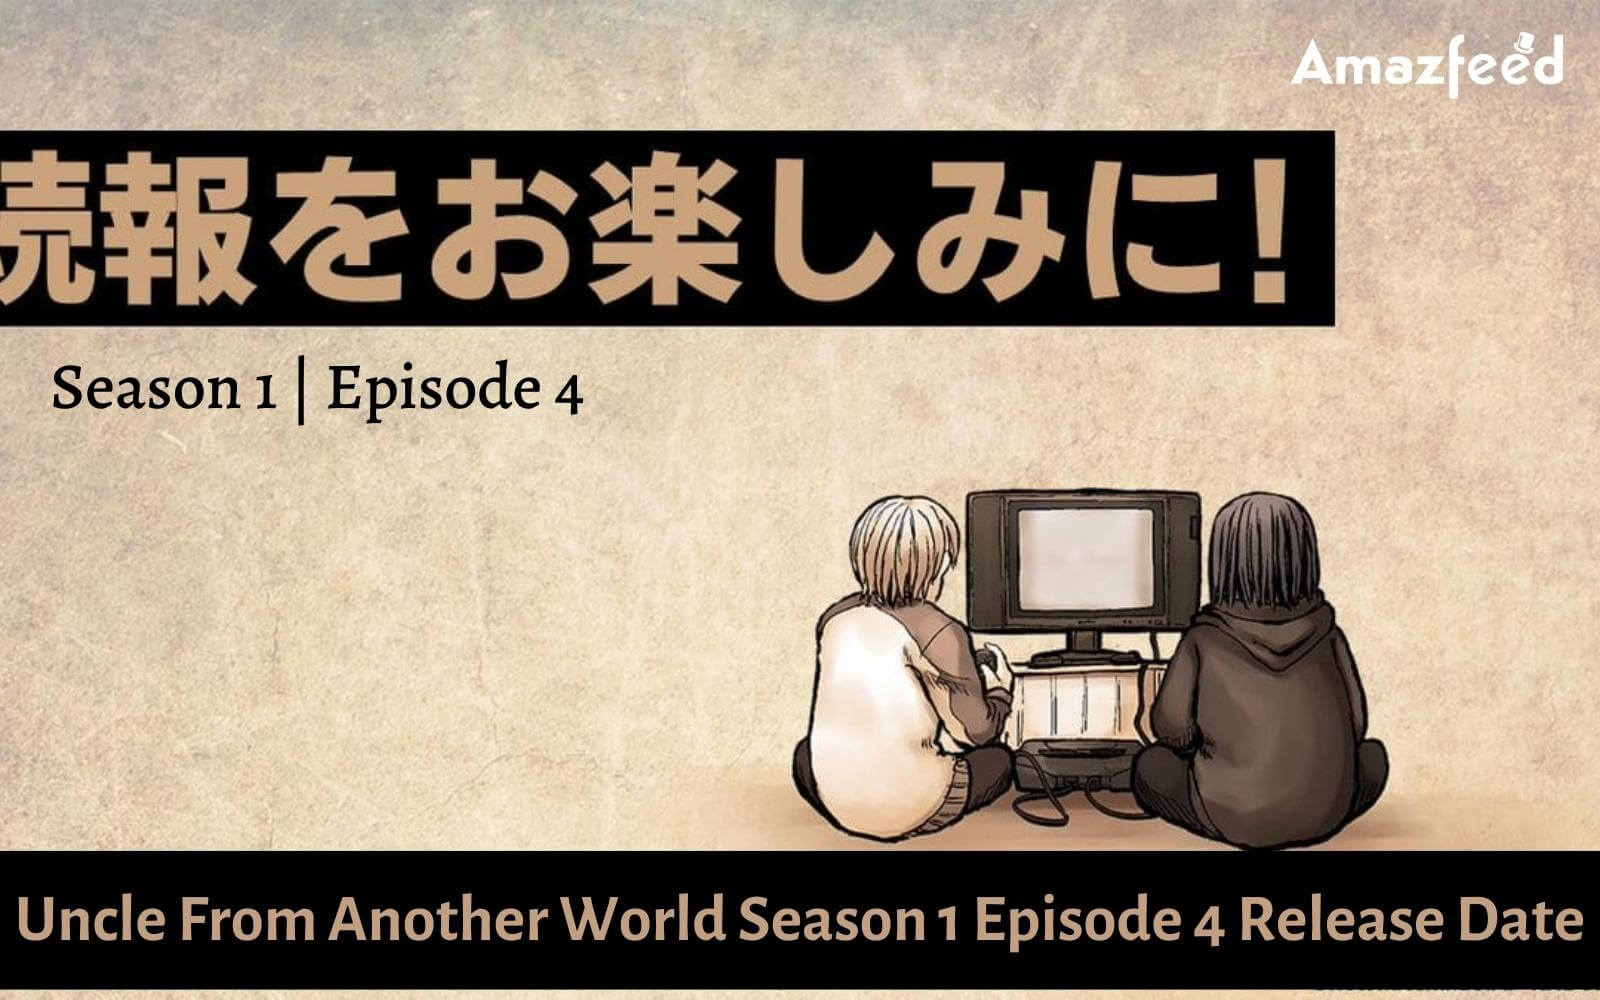 Uncle From Another World Season 1 Episode 4: Where to Watch, Trailer, Cast, Countdown & Spoiler